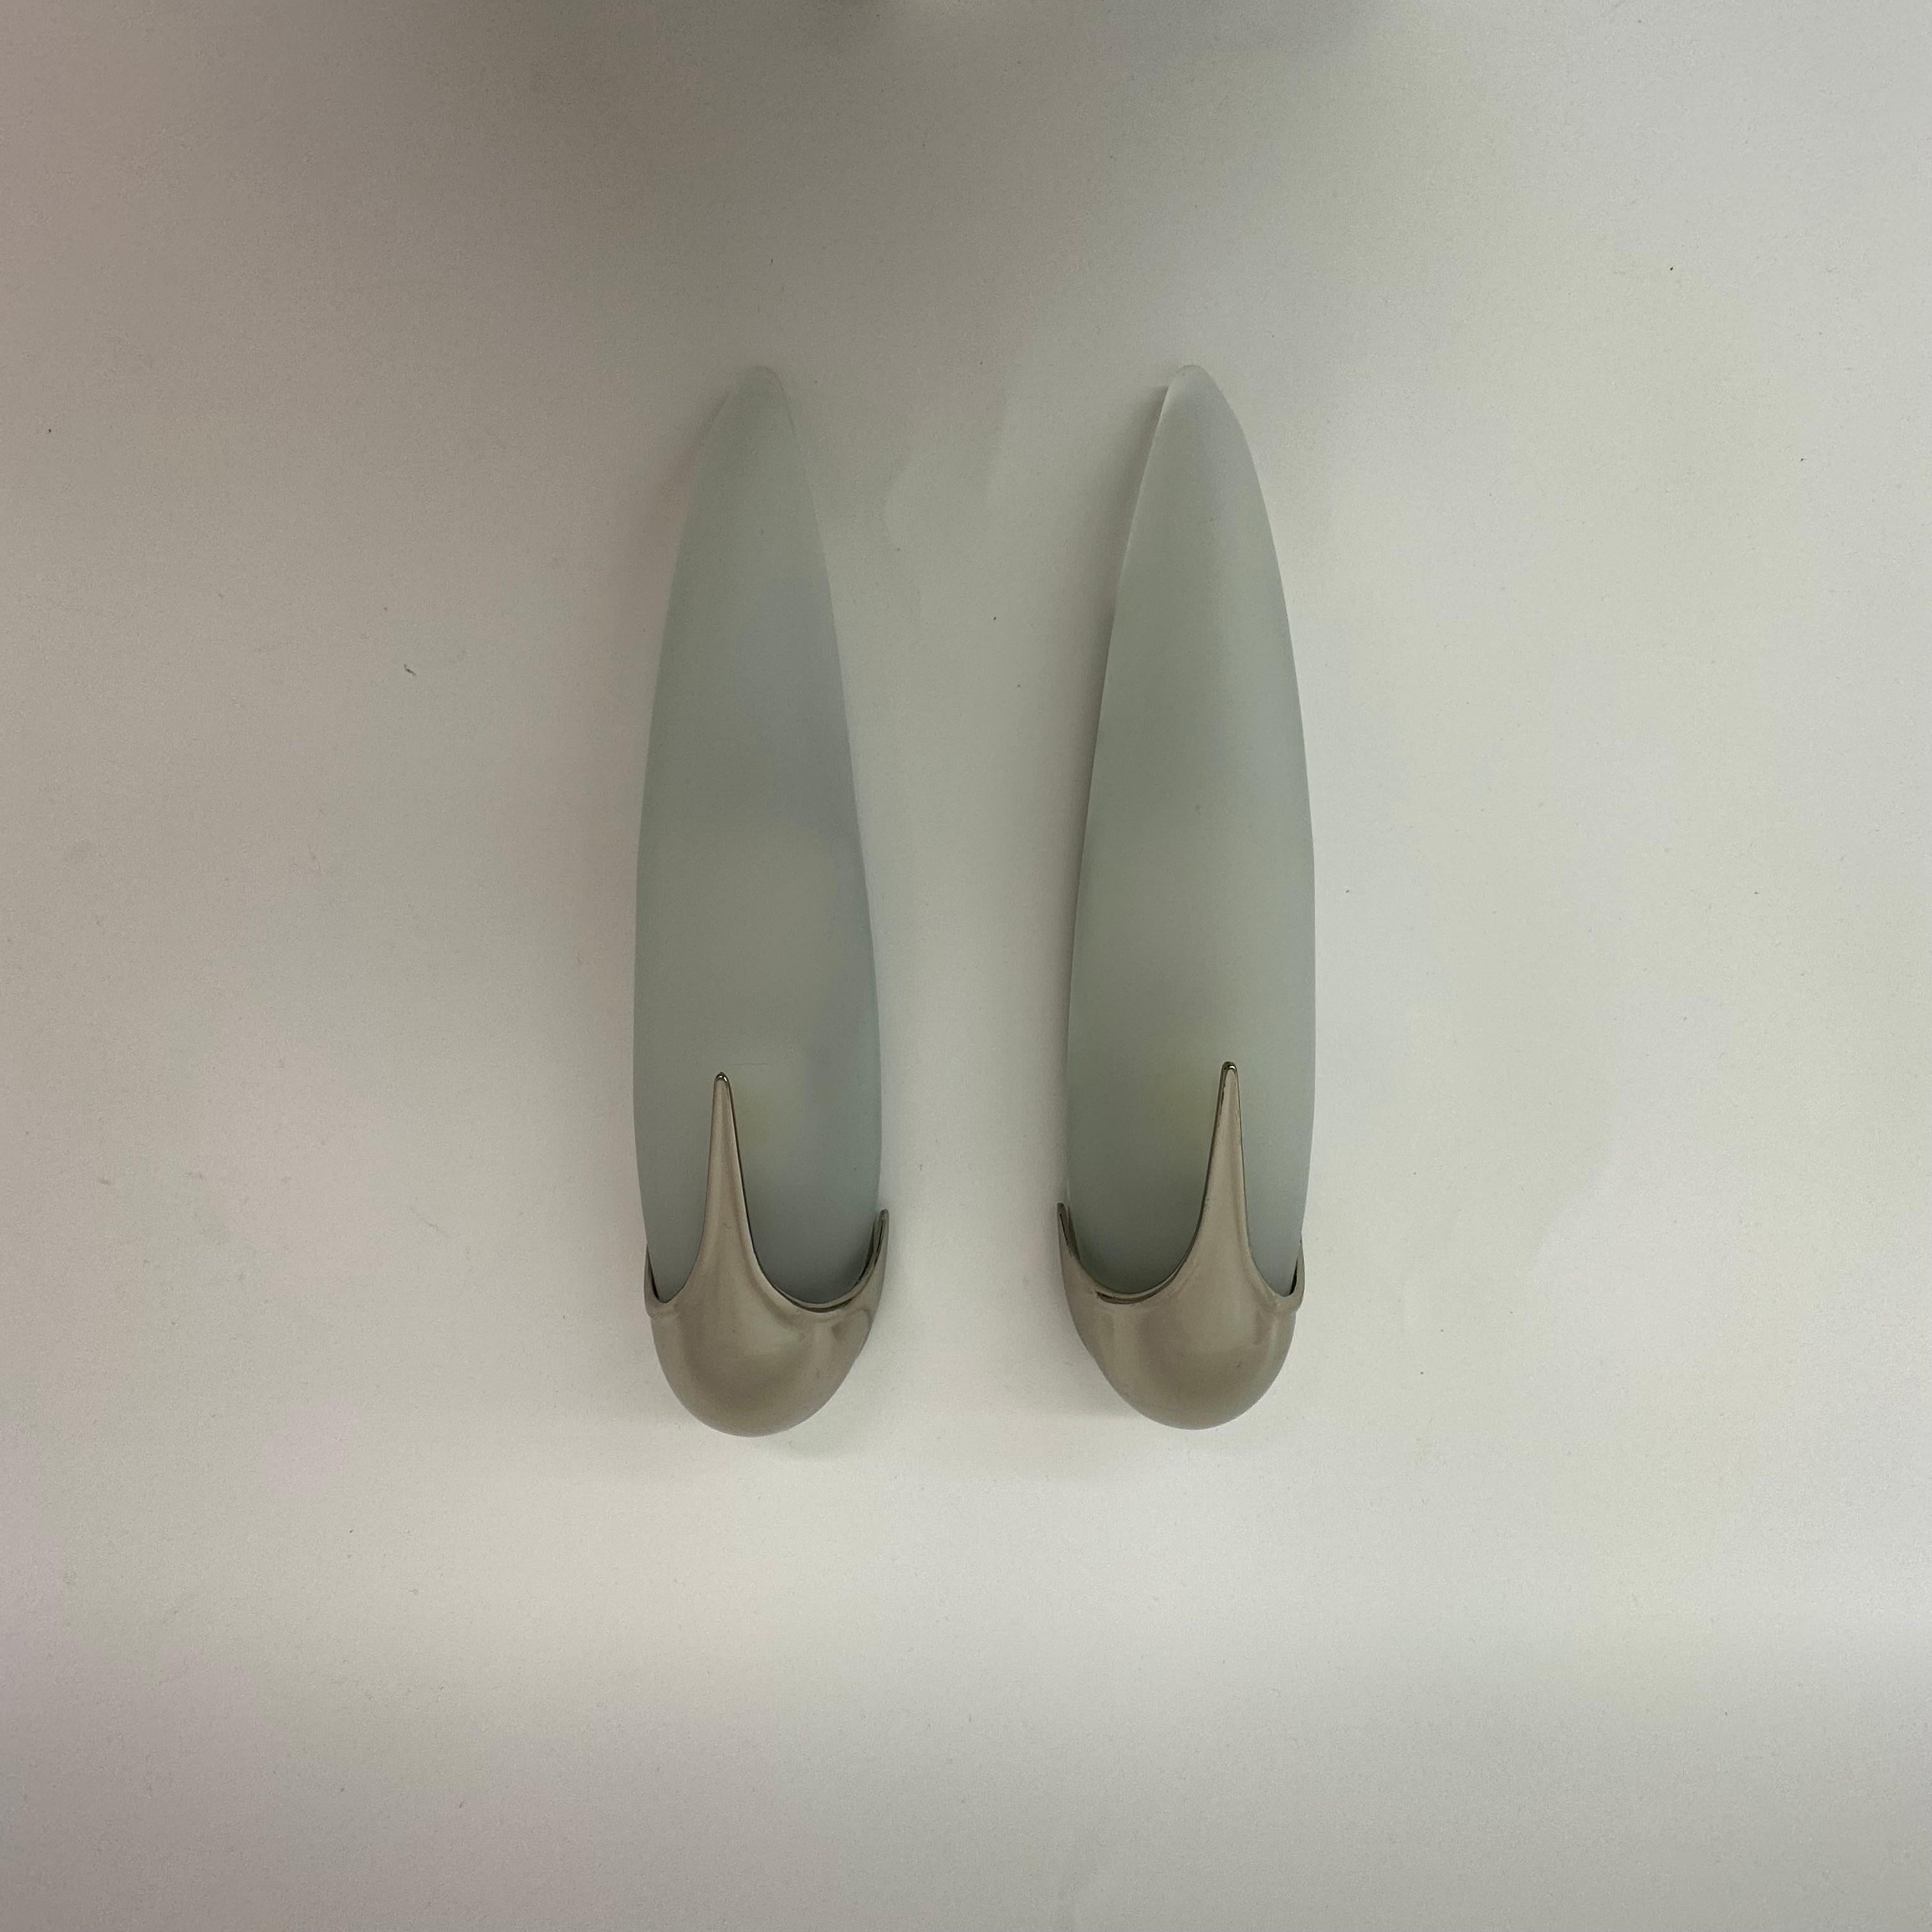 Pair of Idearte Sconces Wall Lamps, Spain, 1980s For Sale 12